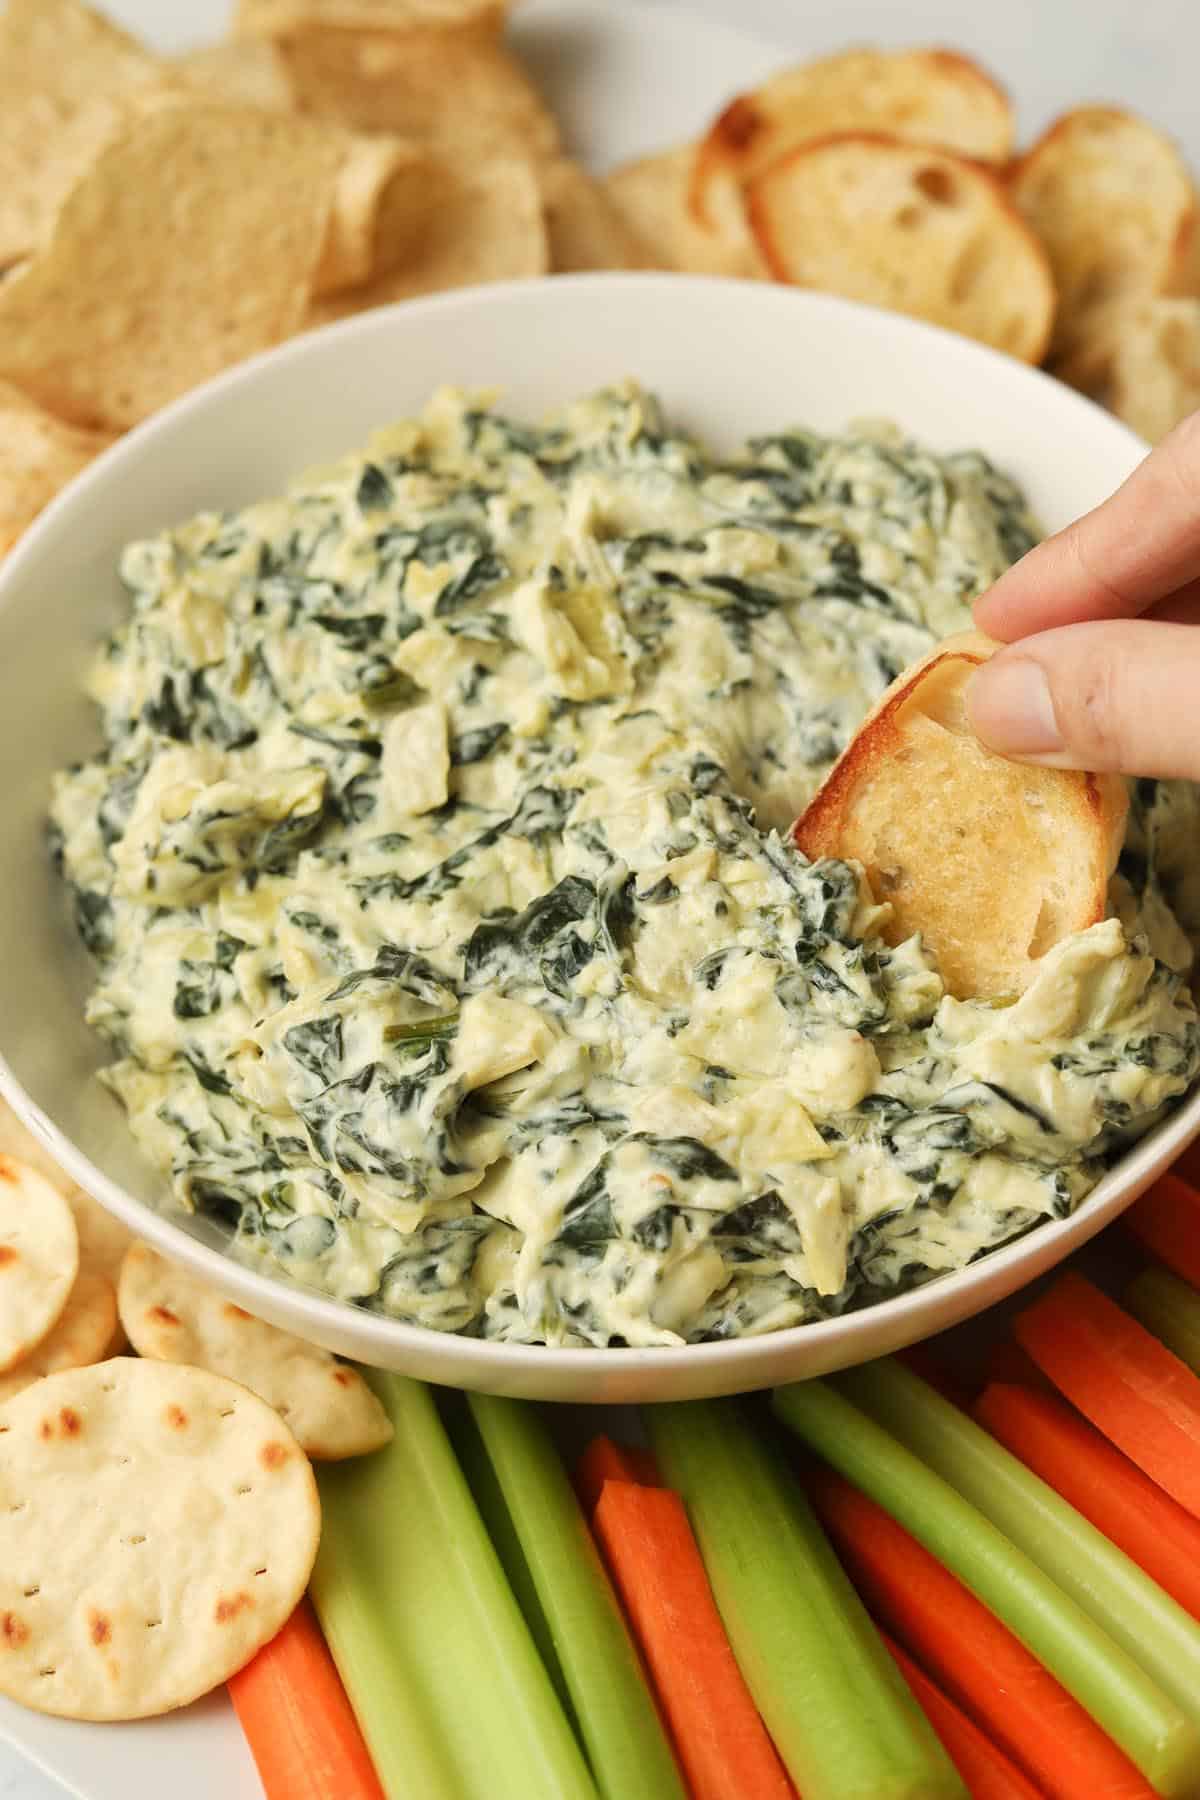 Bread dipping in spinach dip.